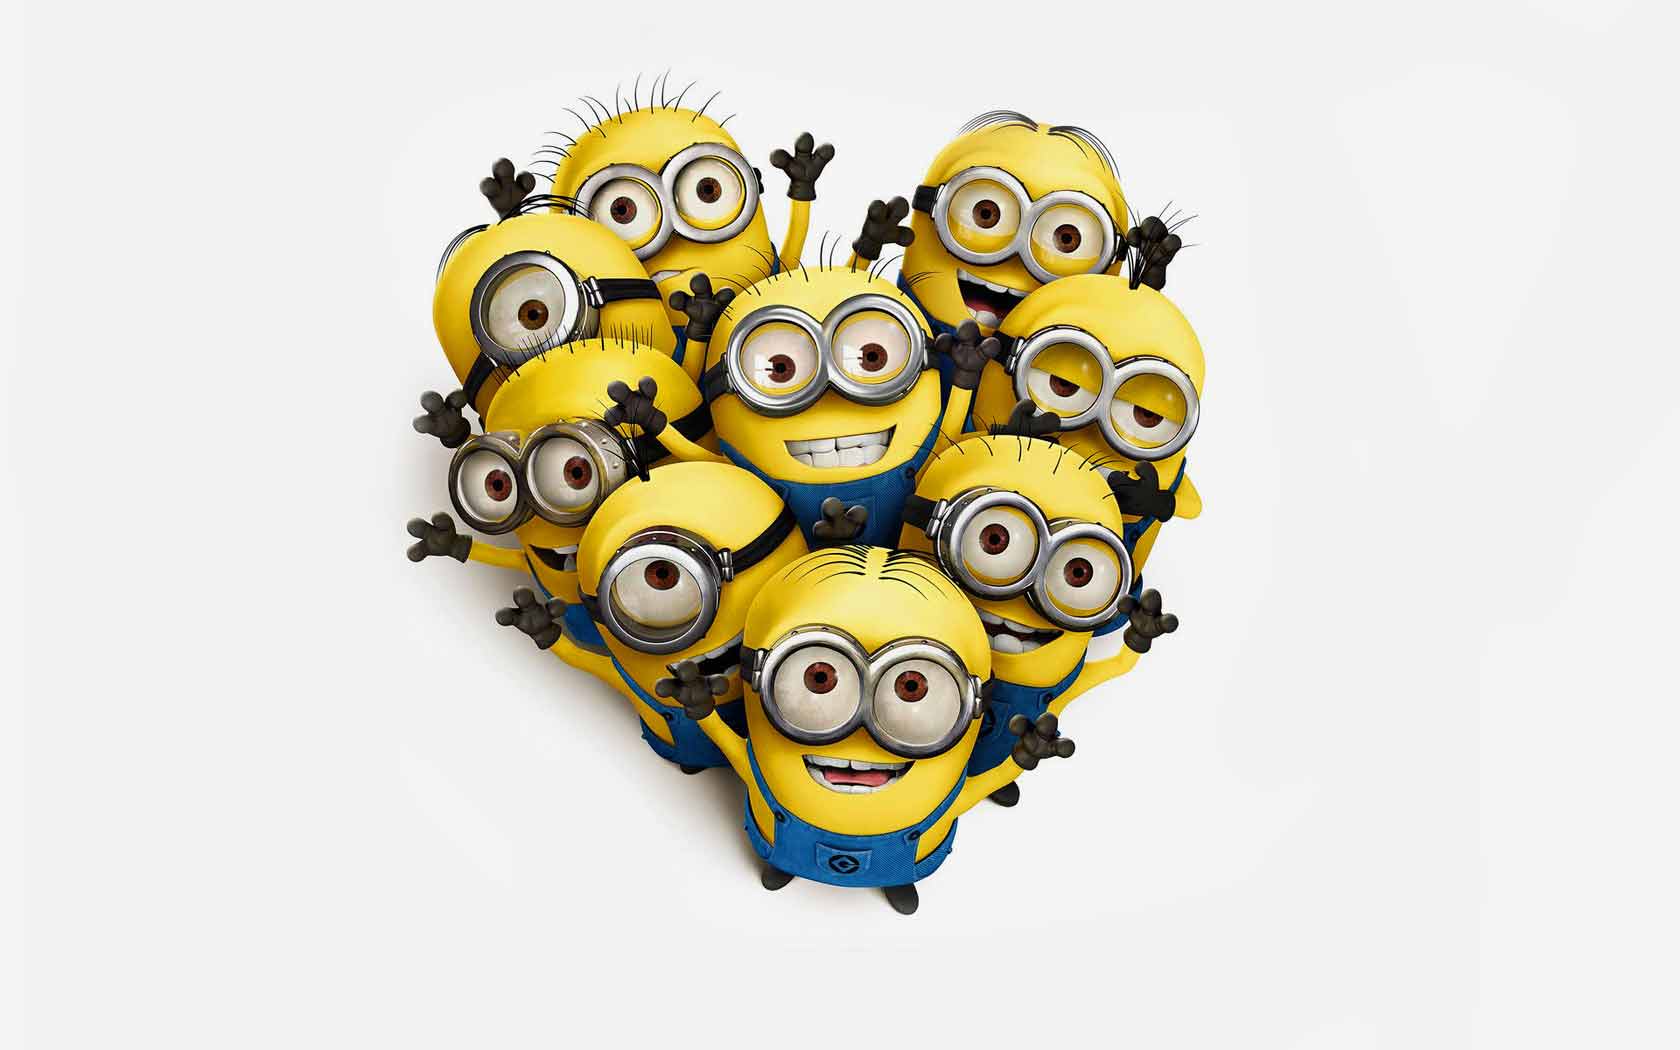 for ios download Despicable Me 2